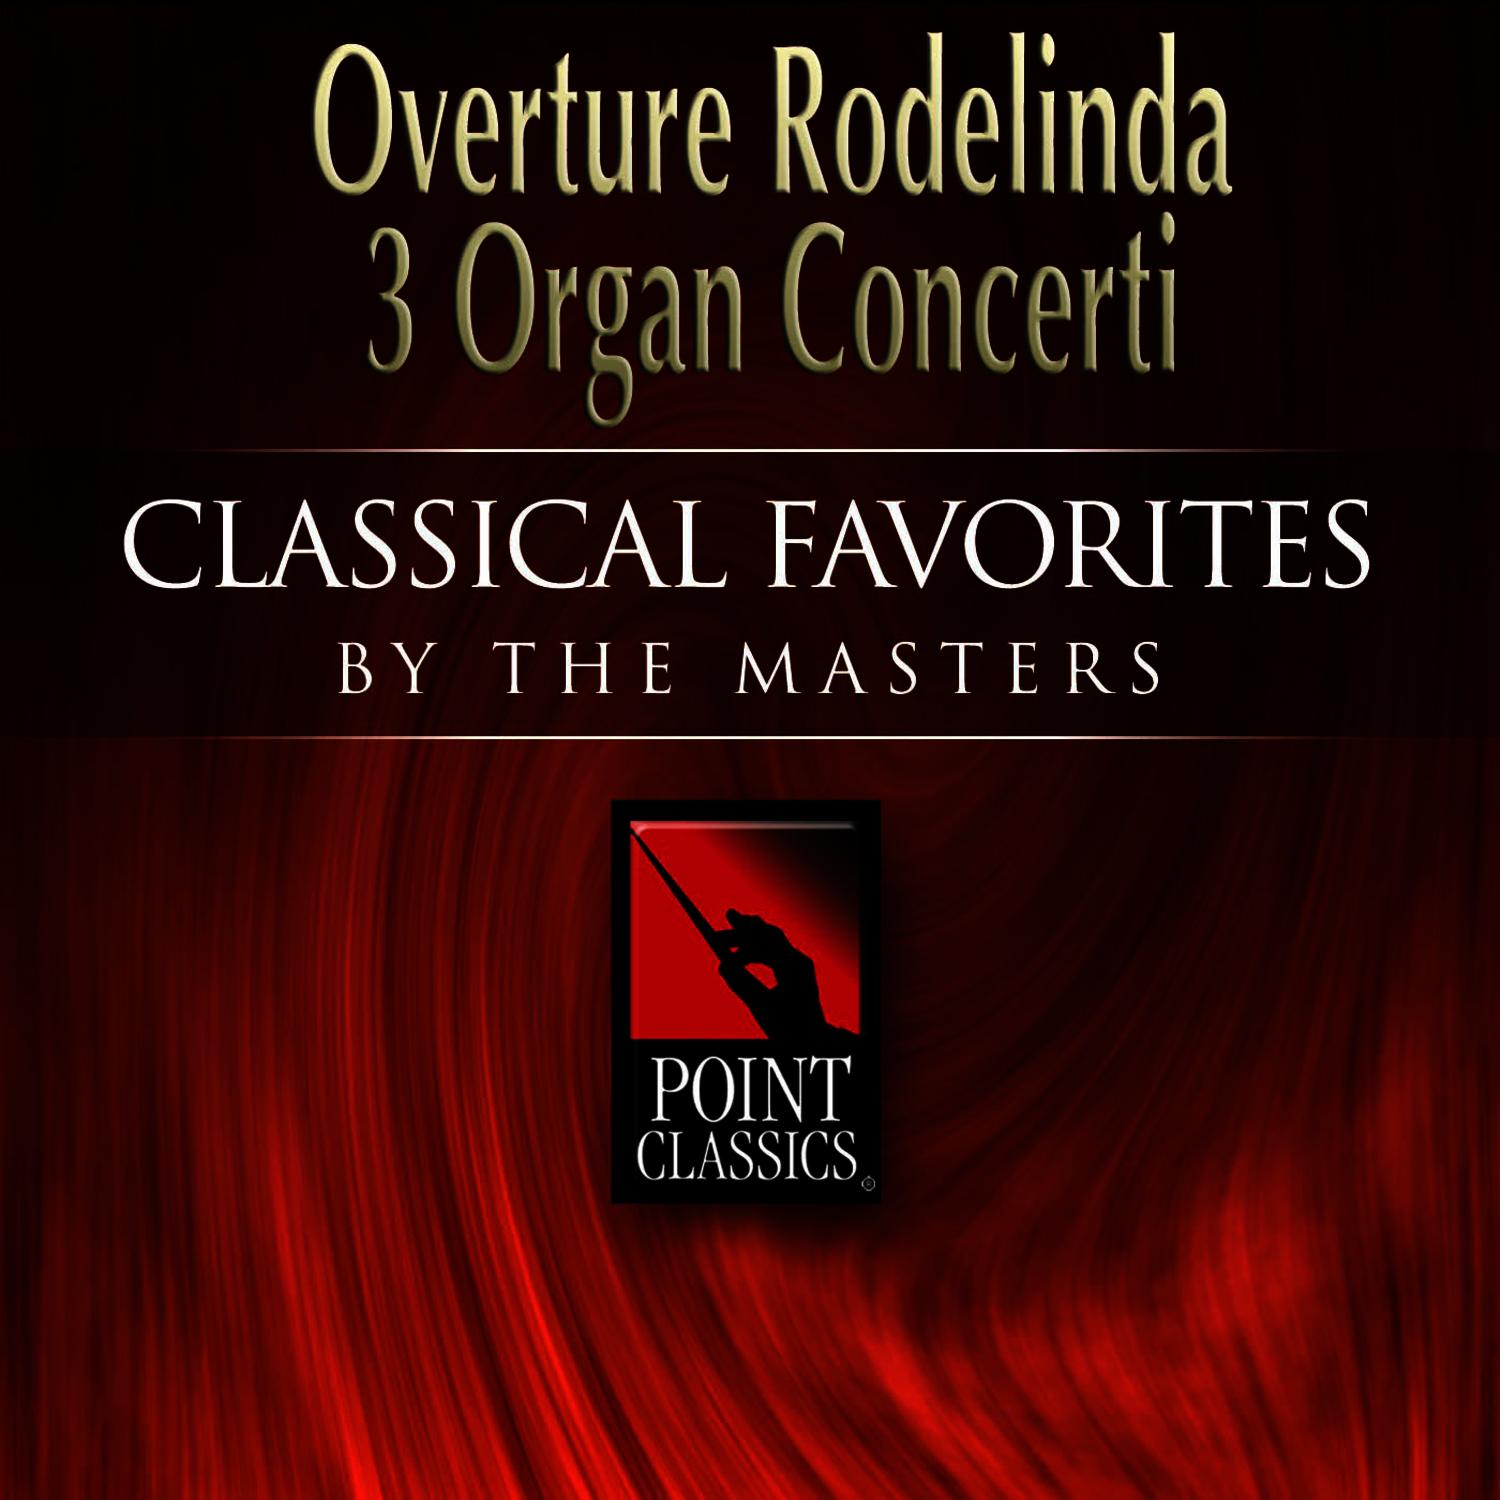 Concerto for Organ and Concerto for Organ and Orchestra No. 1, in G minor, Op. 4: Larghetto e staccatoOrchestra No. 4, in F Major, Op. 4: Andante